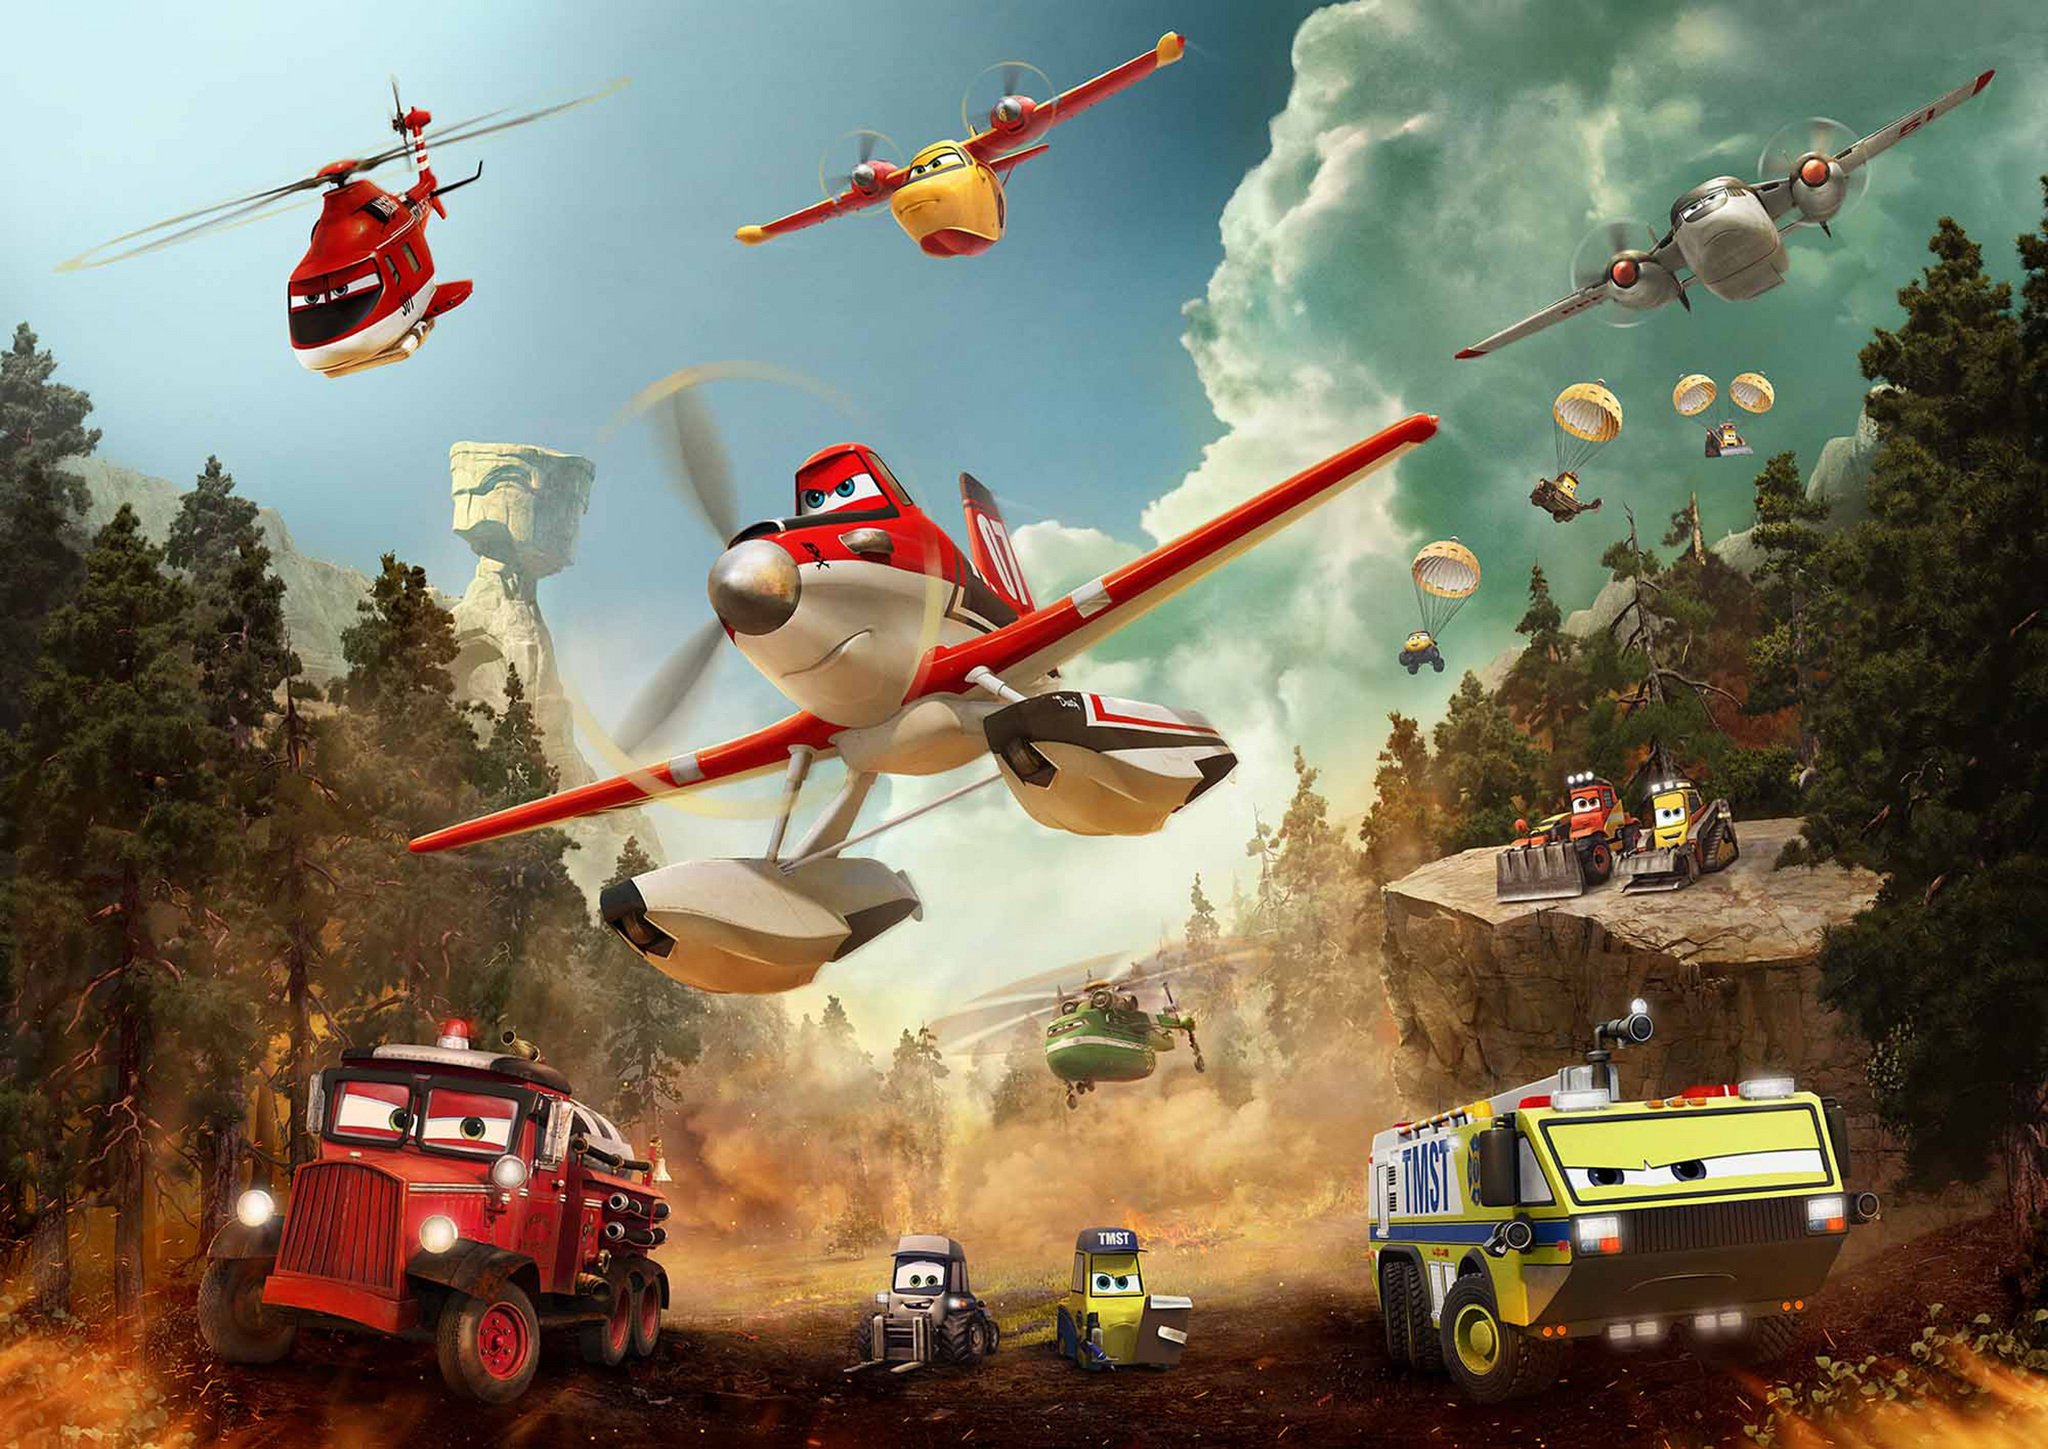 PLANES Fire Rescue animation aircraft airplane comedy family 1pfr ...